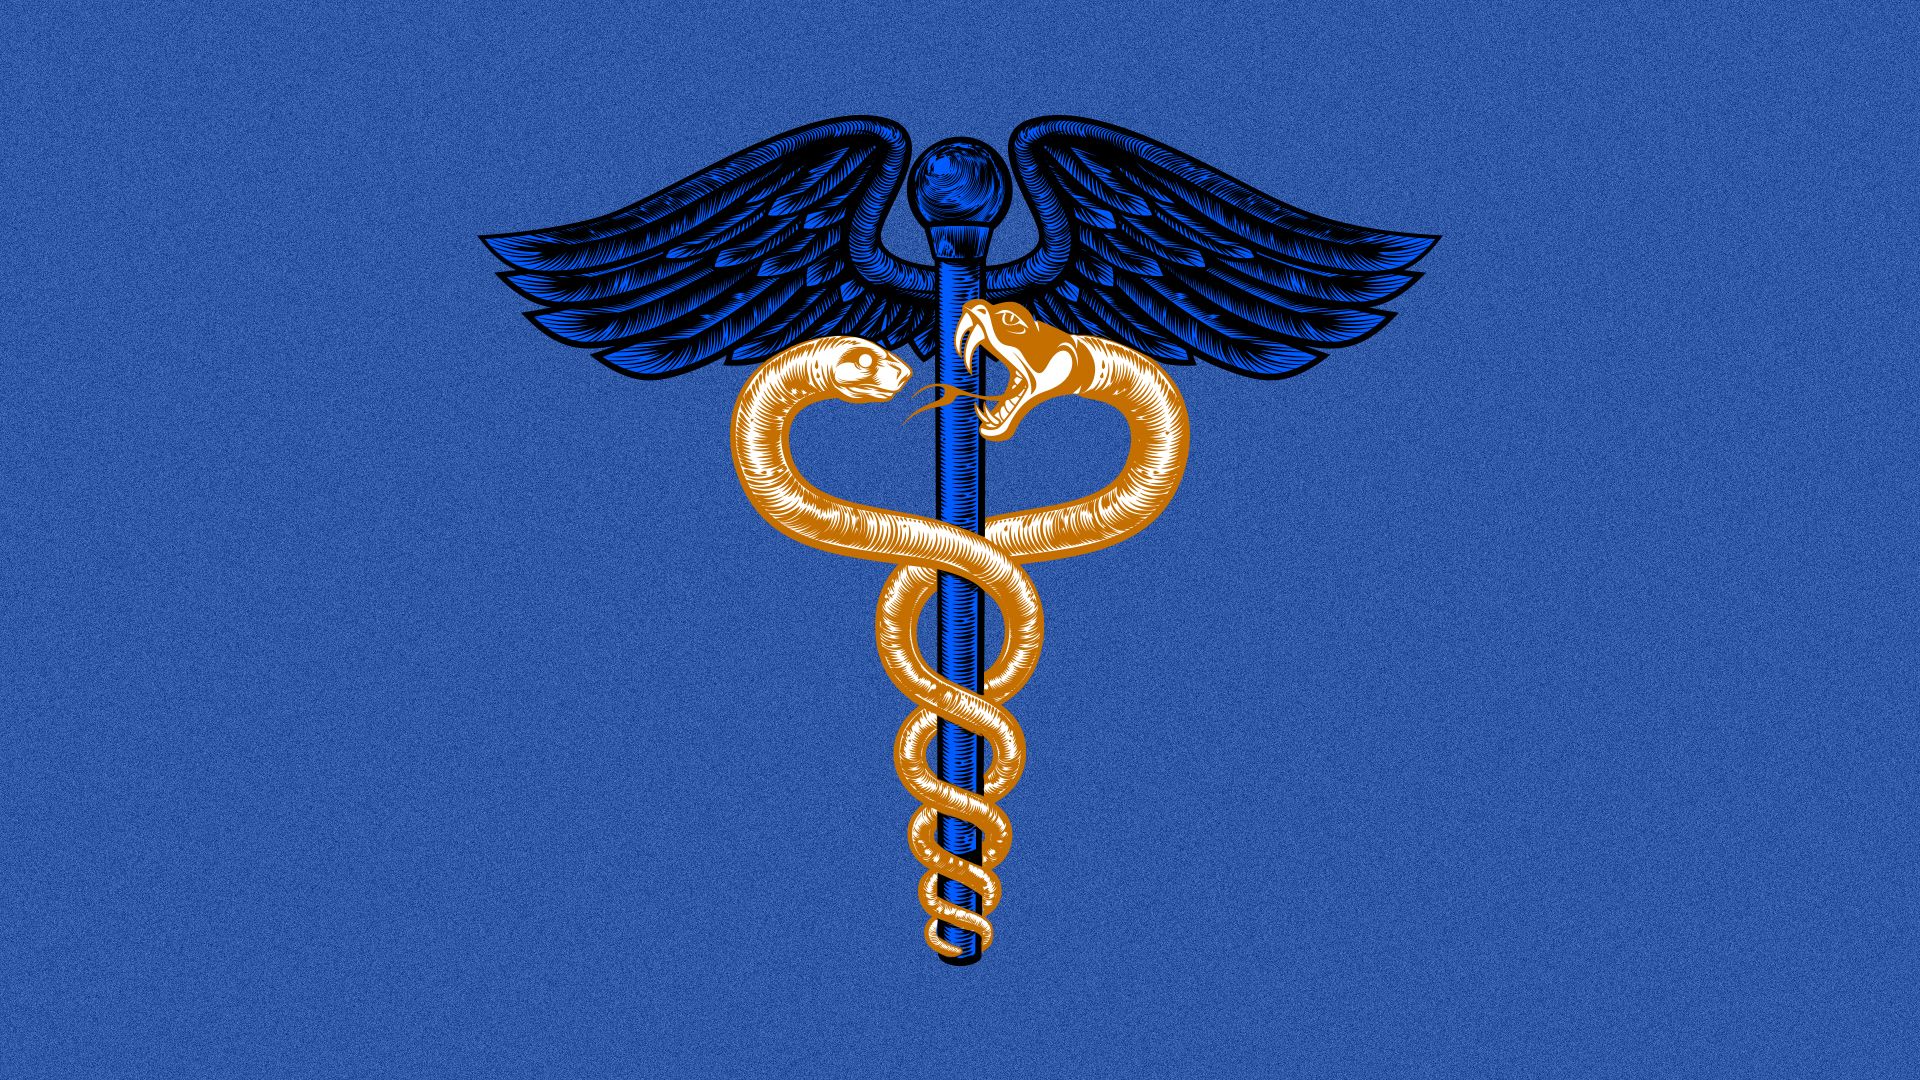 Illustration of Caduceus with two snakes fighting.